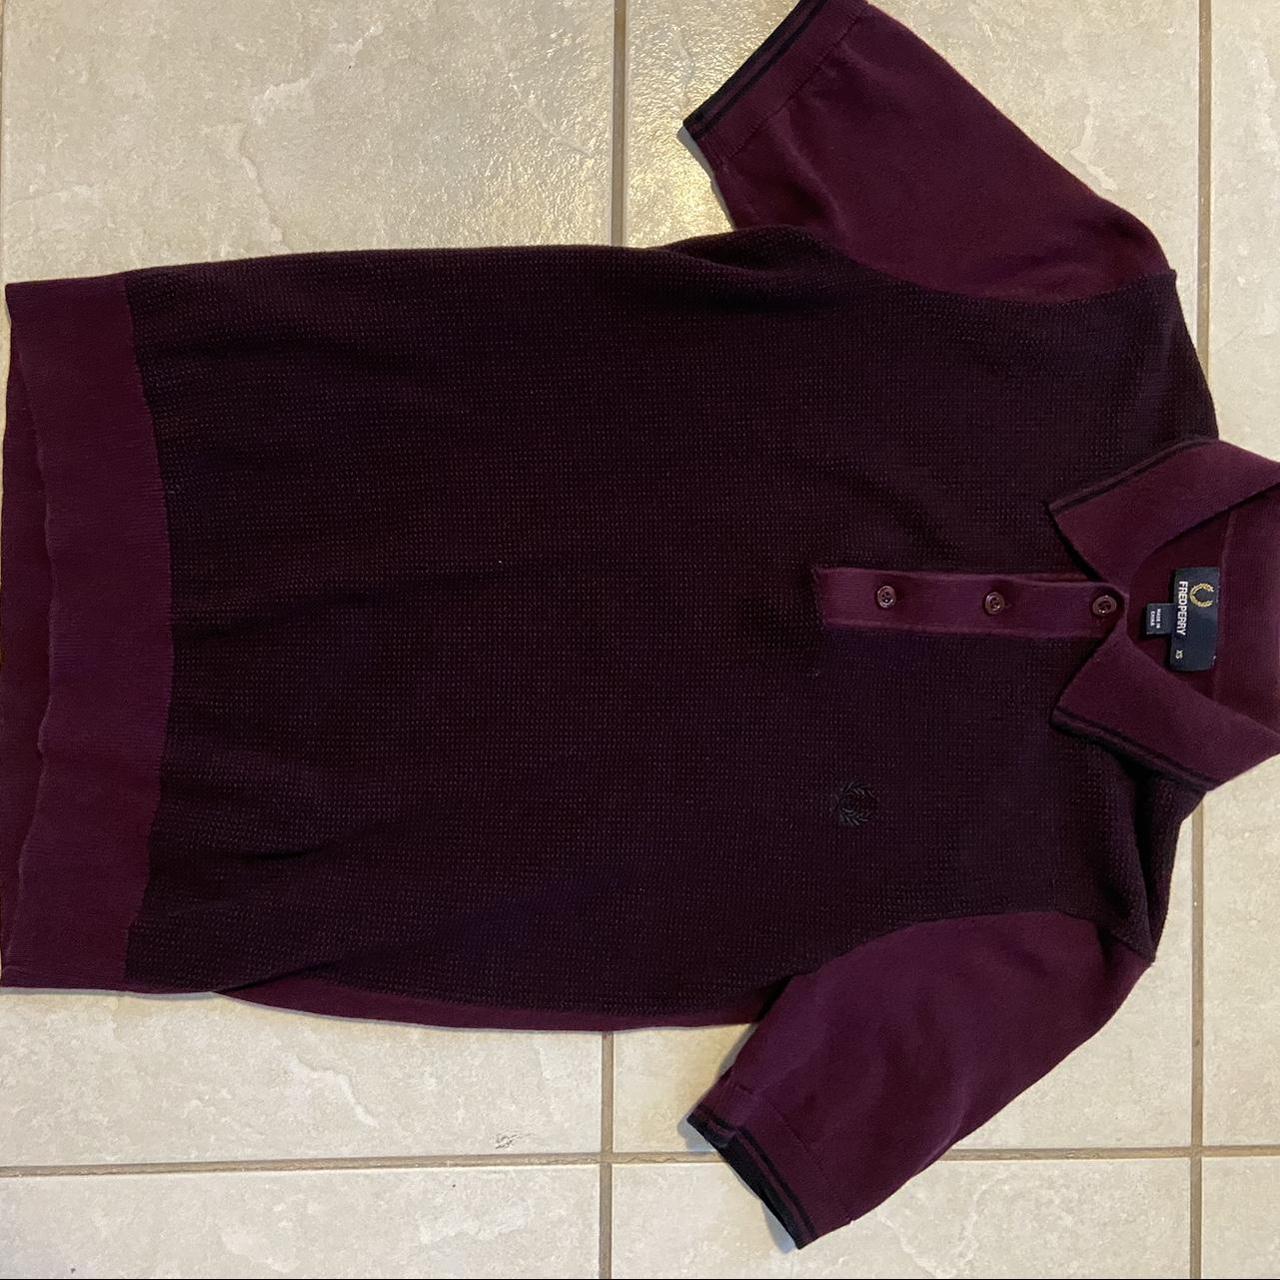 Fred Perry Men's Burgundy and Black Polo-shirts | Depop